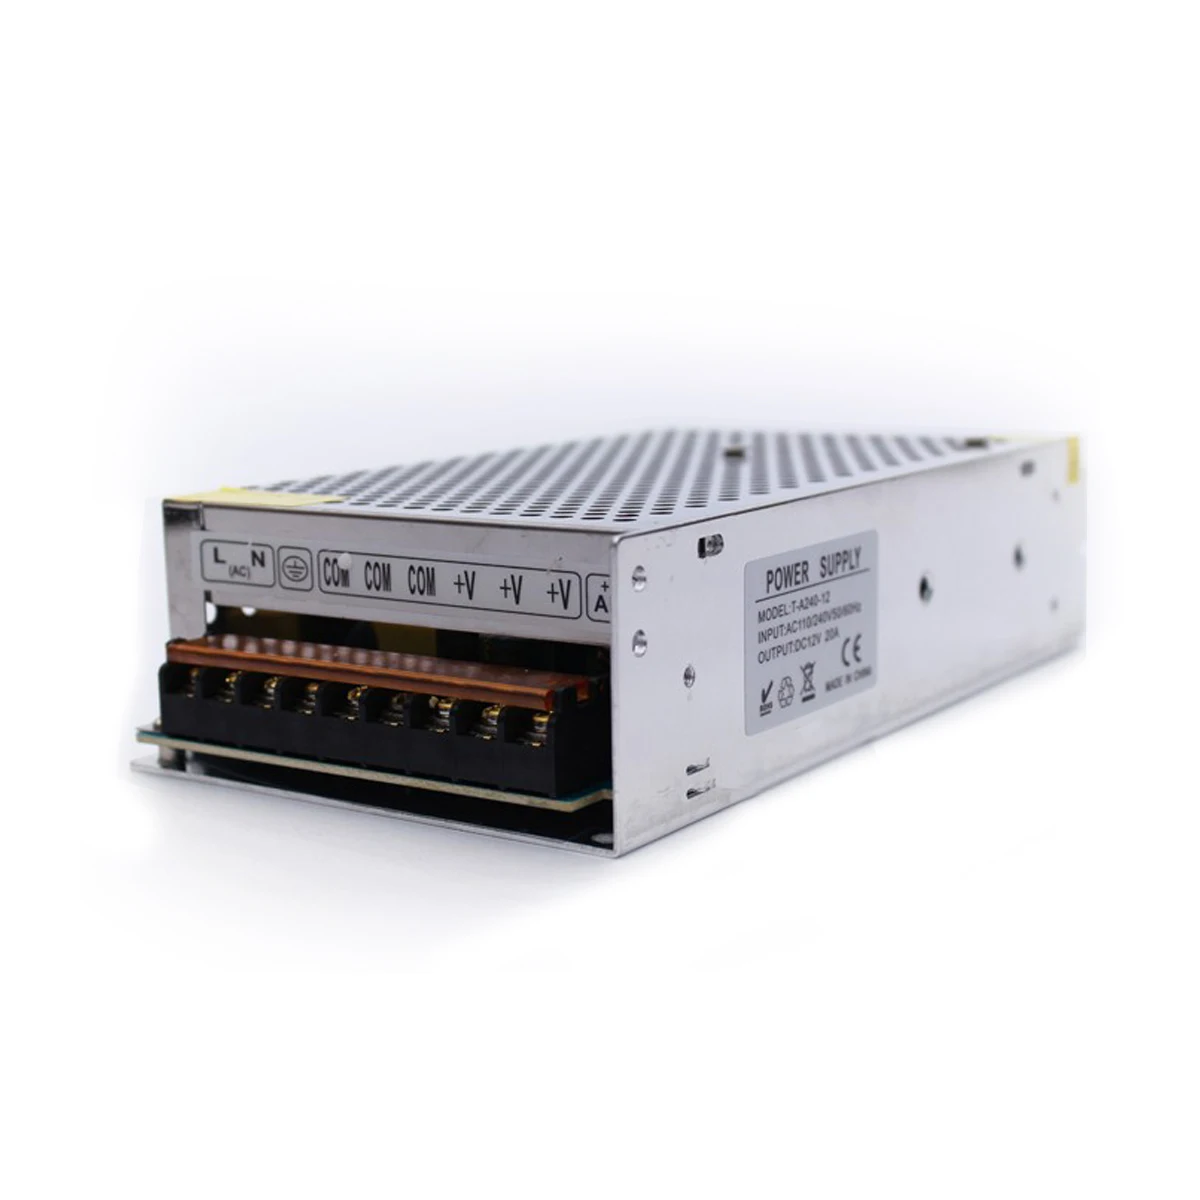 

BESDER 12V 20A 240W Switch Switching Power Supply for CCTV Camera for Security System 110-240V